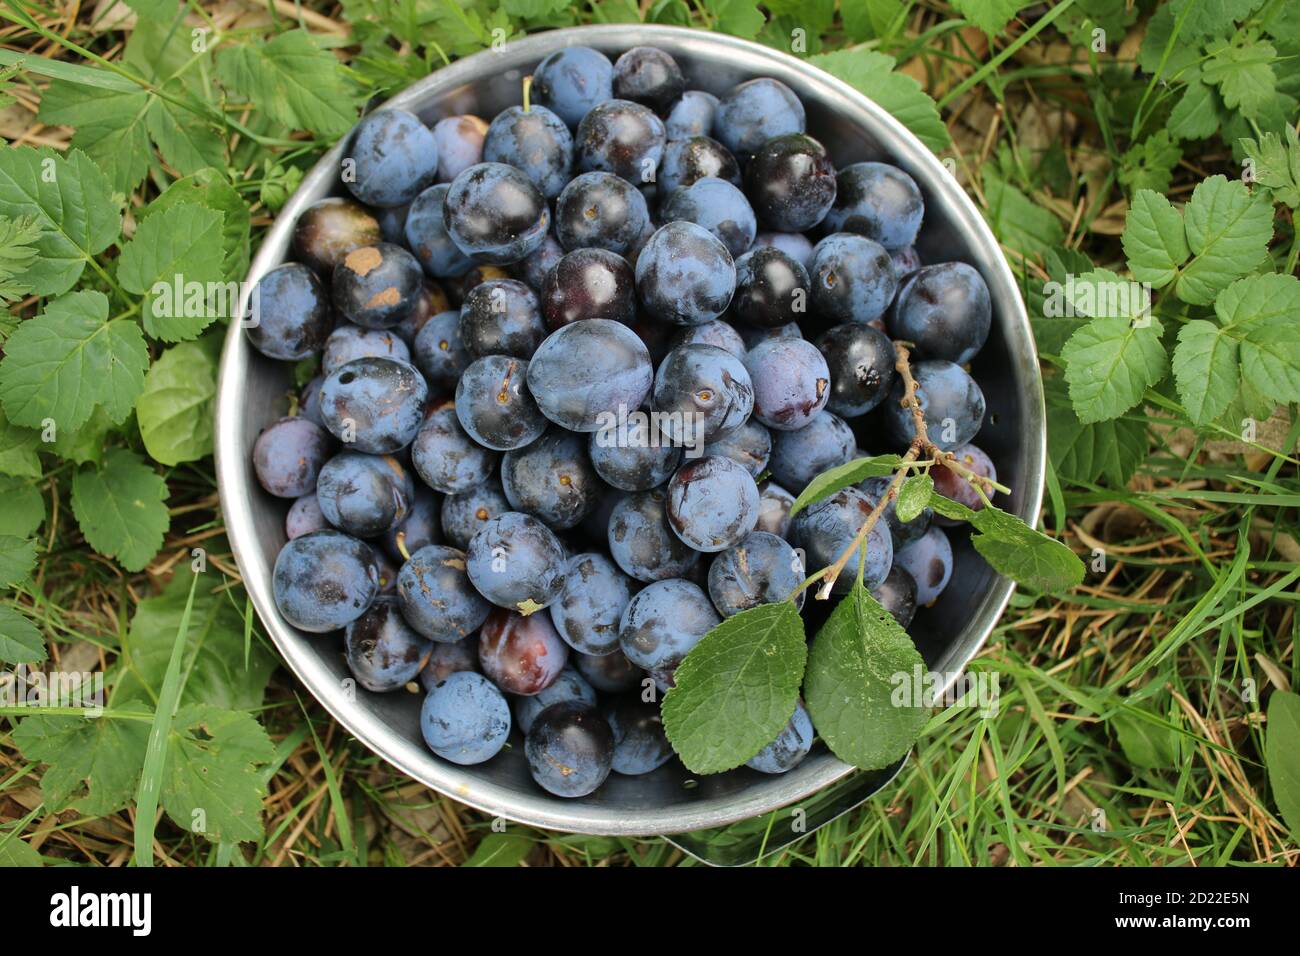 Close up damsons home grown ripe purple organic foraged plum fruit freshly picked for jam making from English garden orchard in metal colander Summer Stock Photo